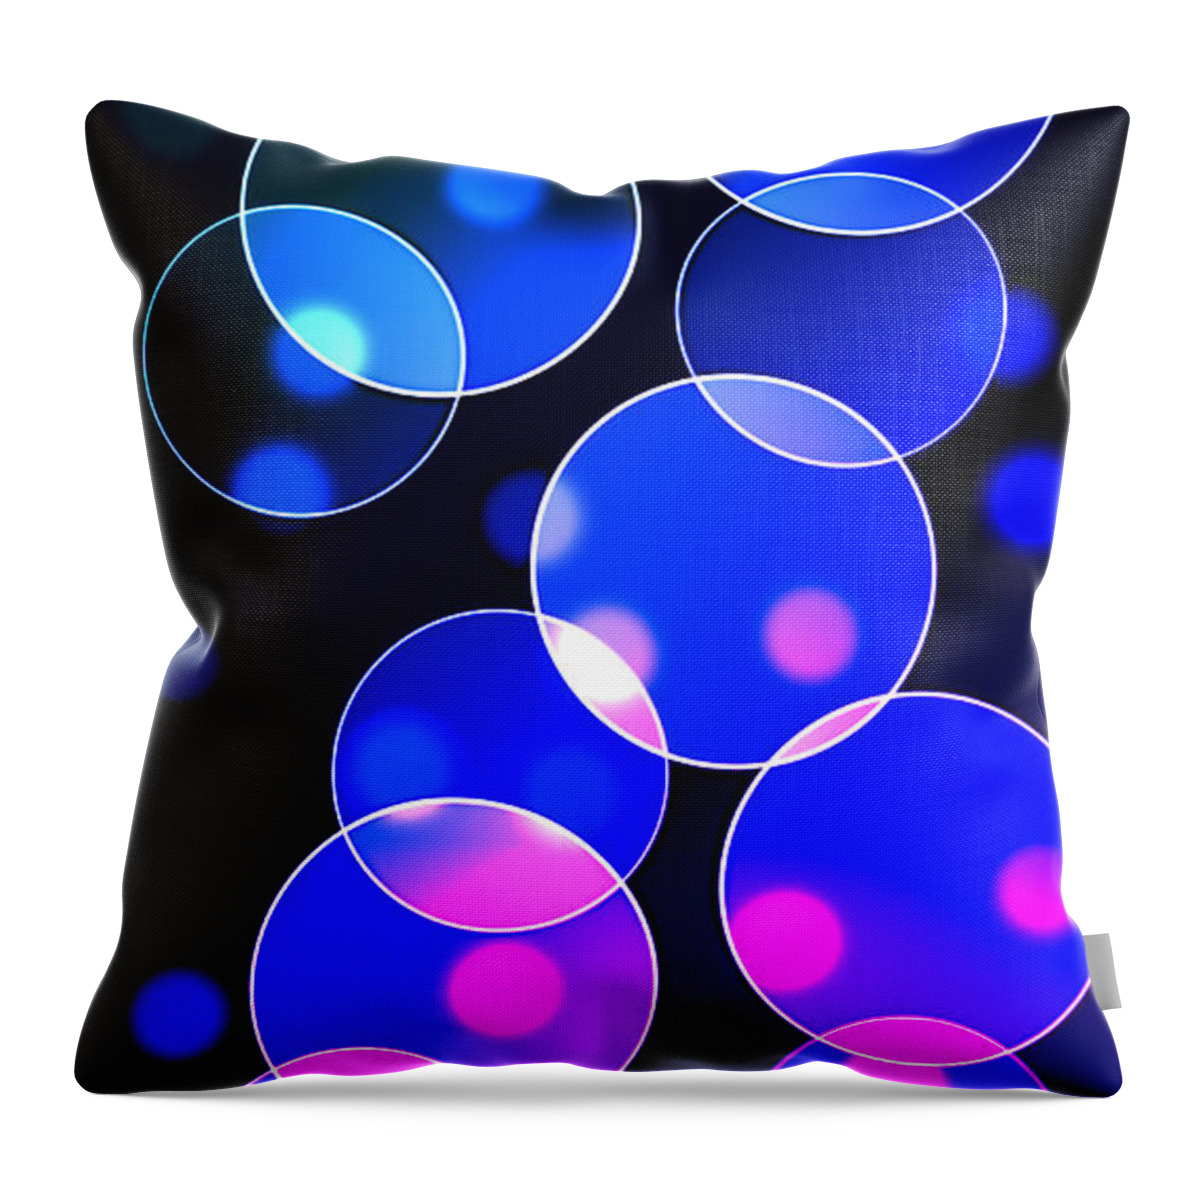 Background Throw Pillow featuring the photograph Circle illustration on Dark Blue Background by Sheryl Caston